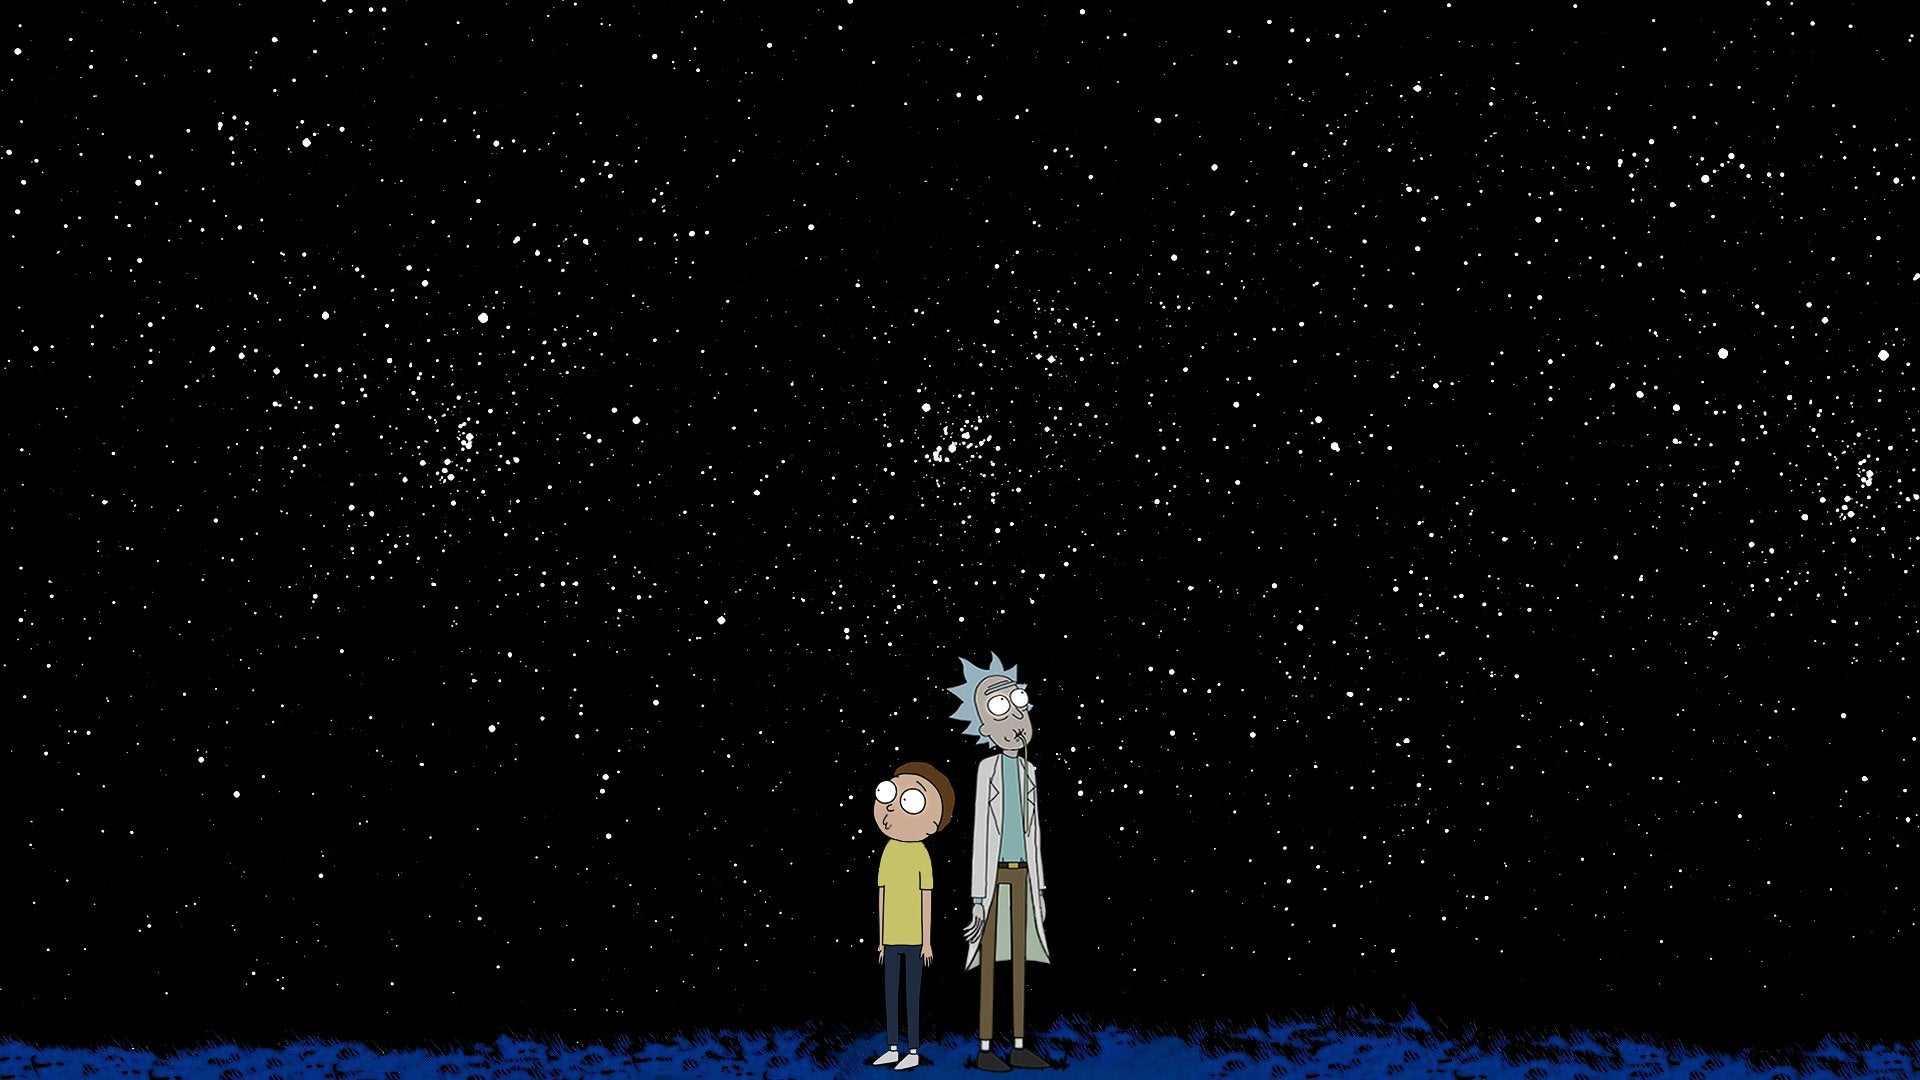 rick and morty live wallpaper,sky,darkness,space,night,theatre